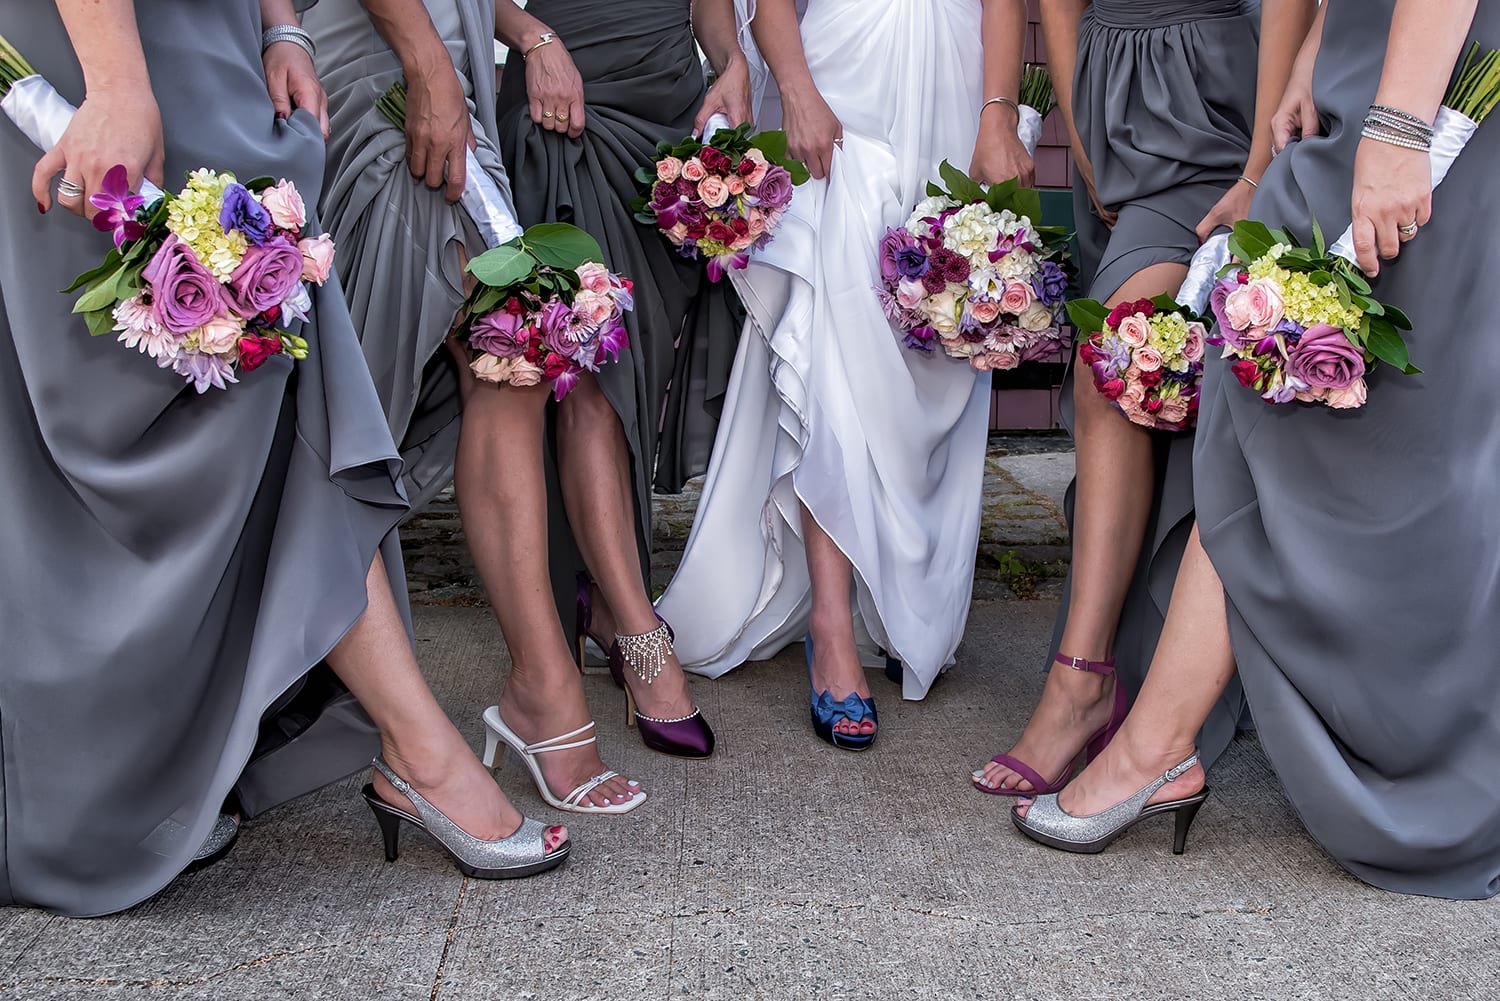 The bride with bridesmaids show off their legs and their wedding shoes at the Historic Properties in Halifax.